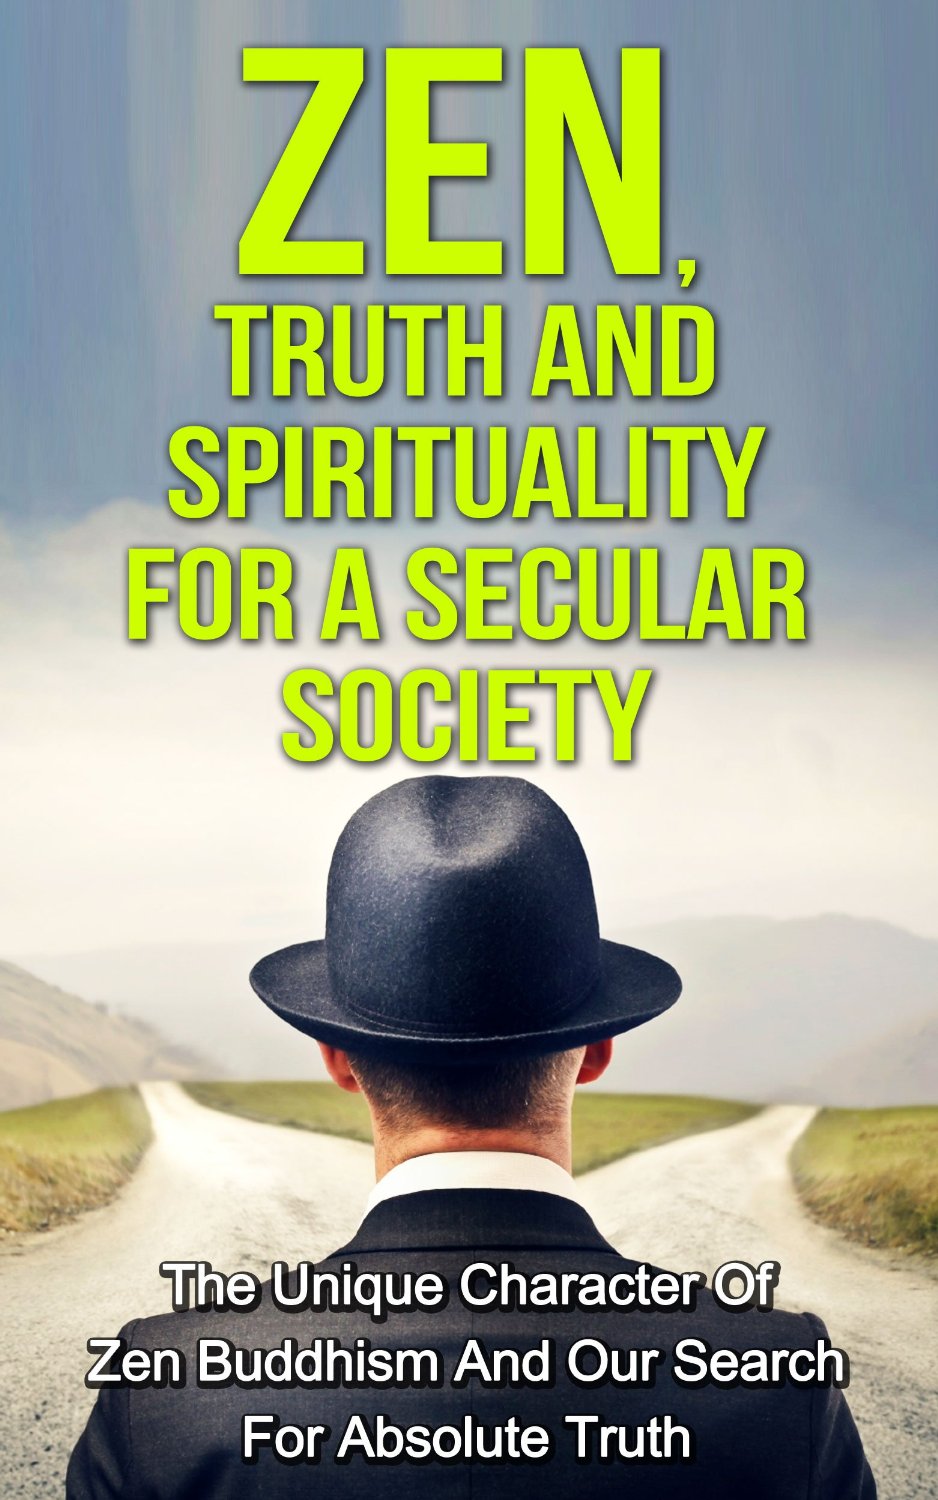 Zen, Truth And Spirituality For A Secular Society by David Carlyle